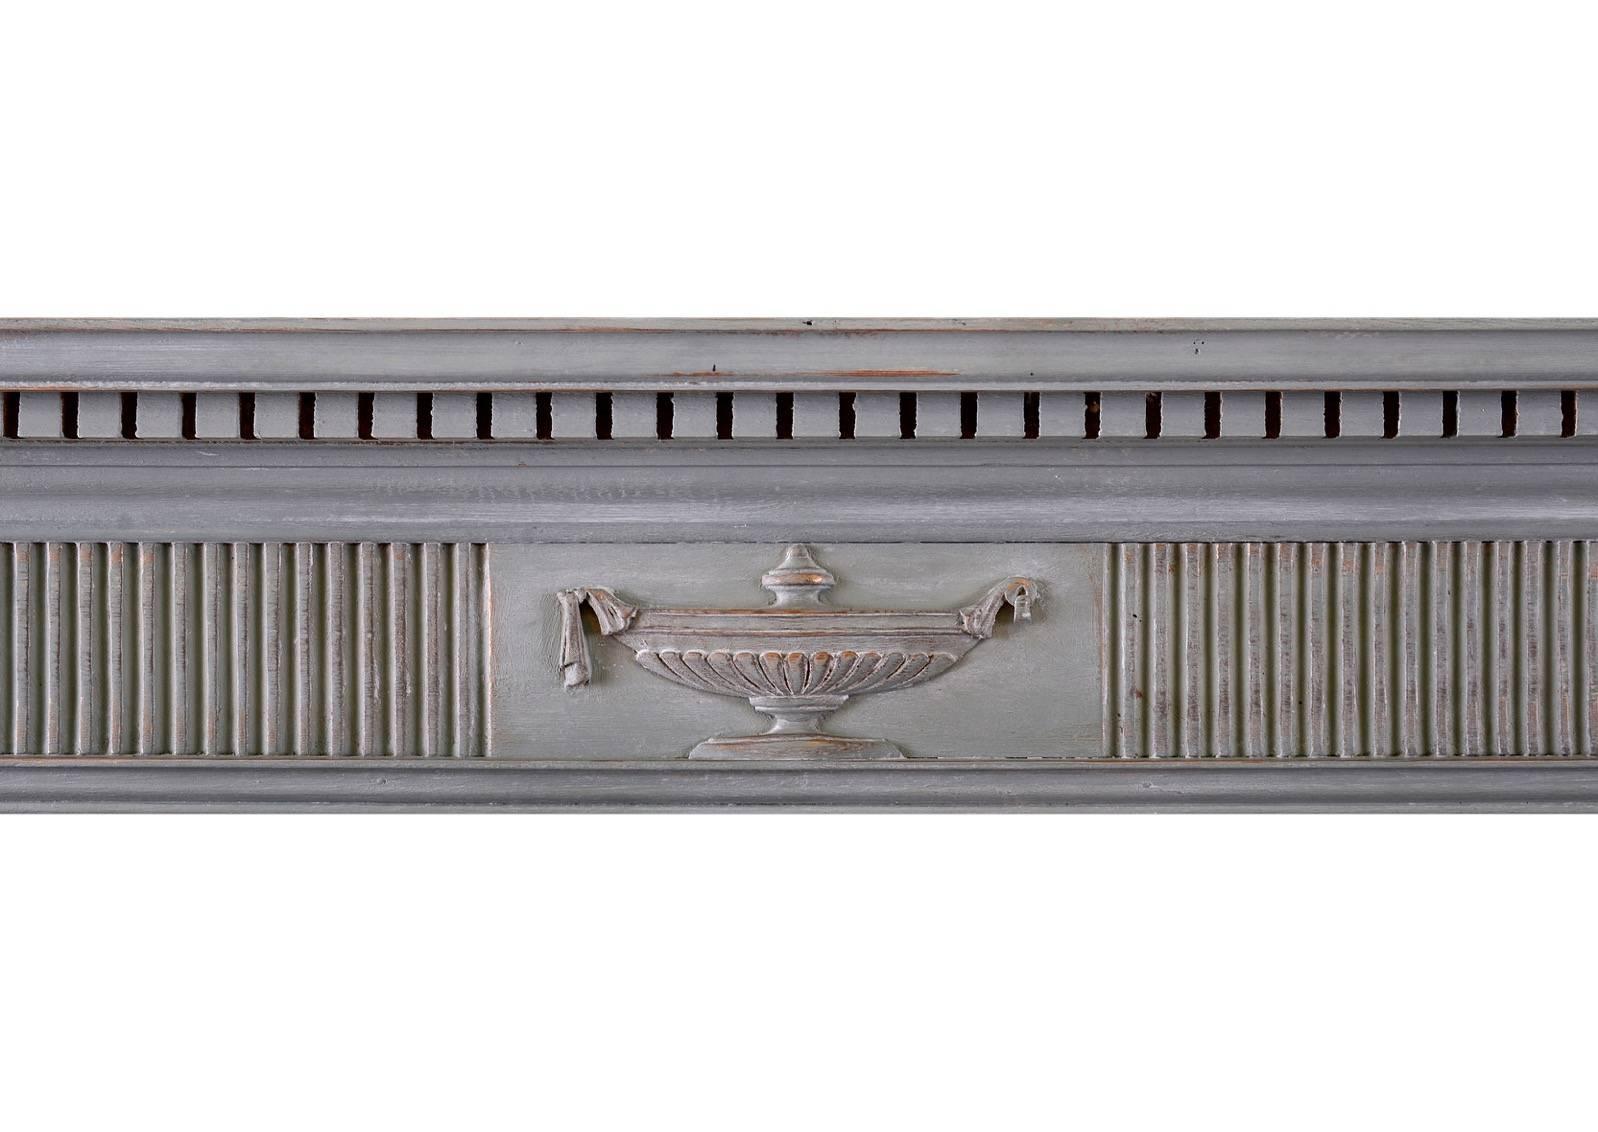 A small and delicate wood fireplace in the Regency style. The jambs surmounted by fluted frieze with carved classical urn to centre. Moulded shelf above. English. Currently painted light blue with elements of gold leaf effect behind. Could be